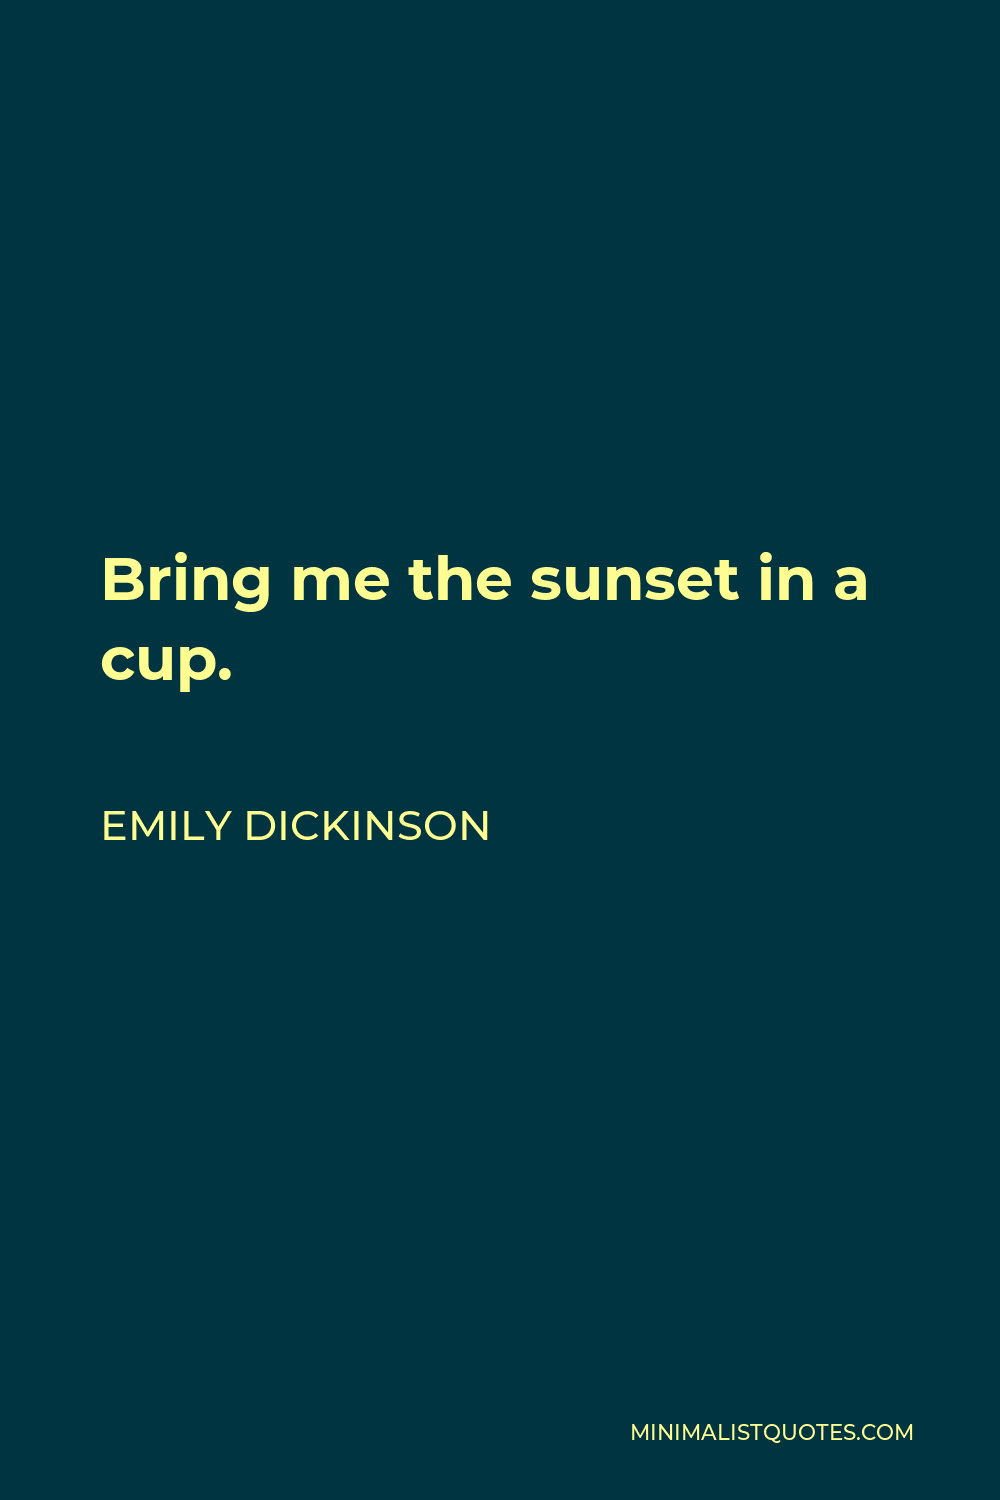 Emily Dickinson Quote - Bring me the sunset in a cup.